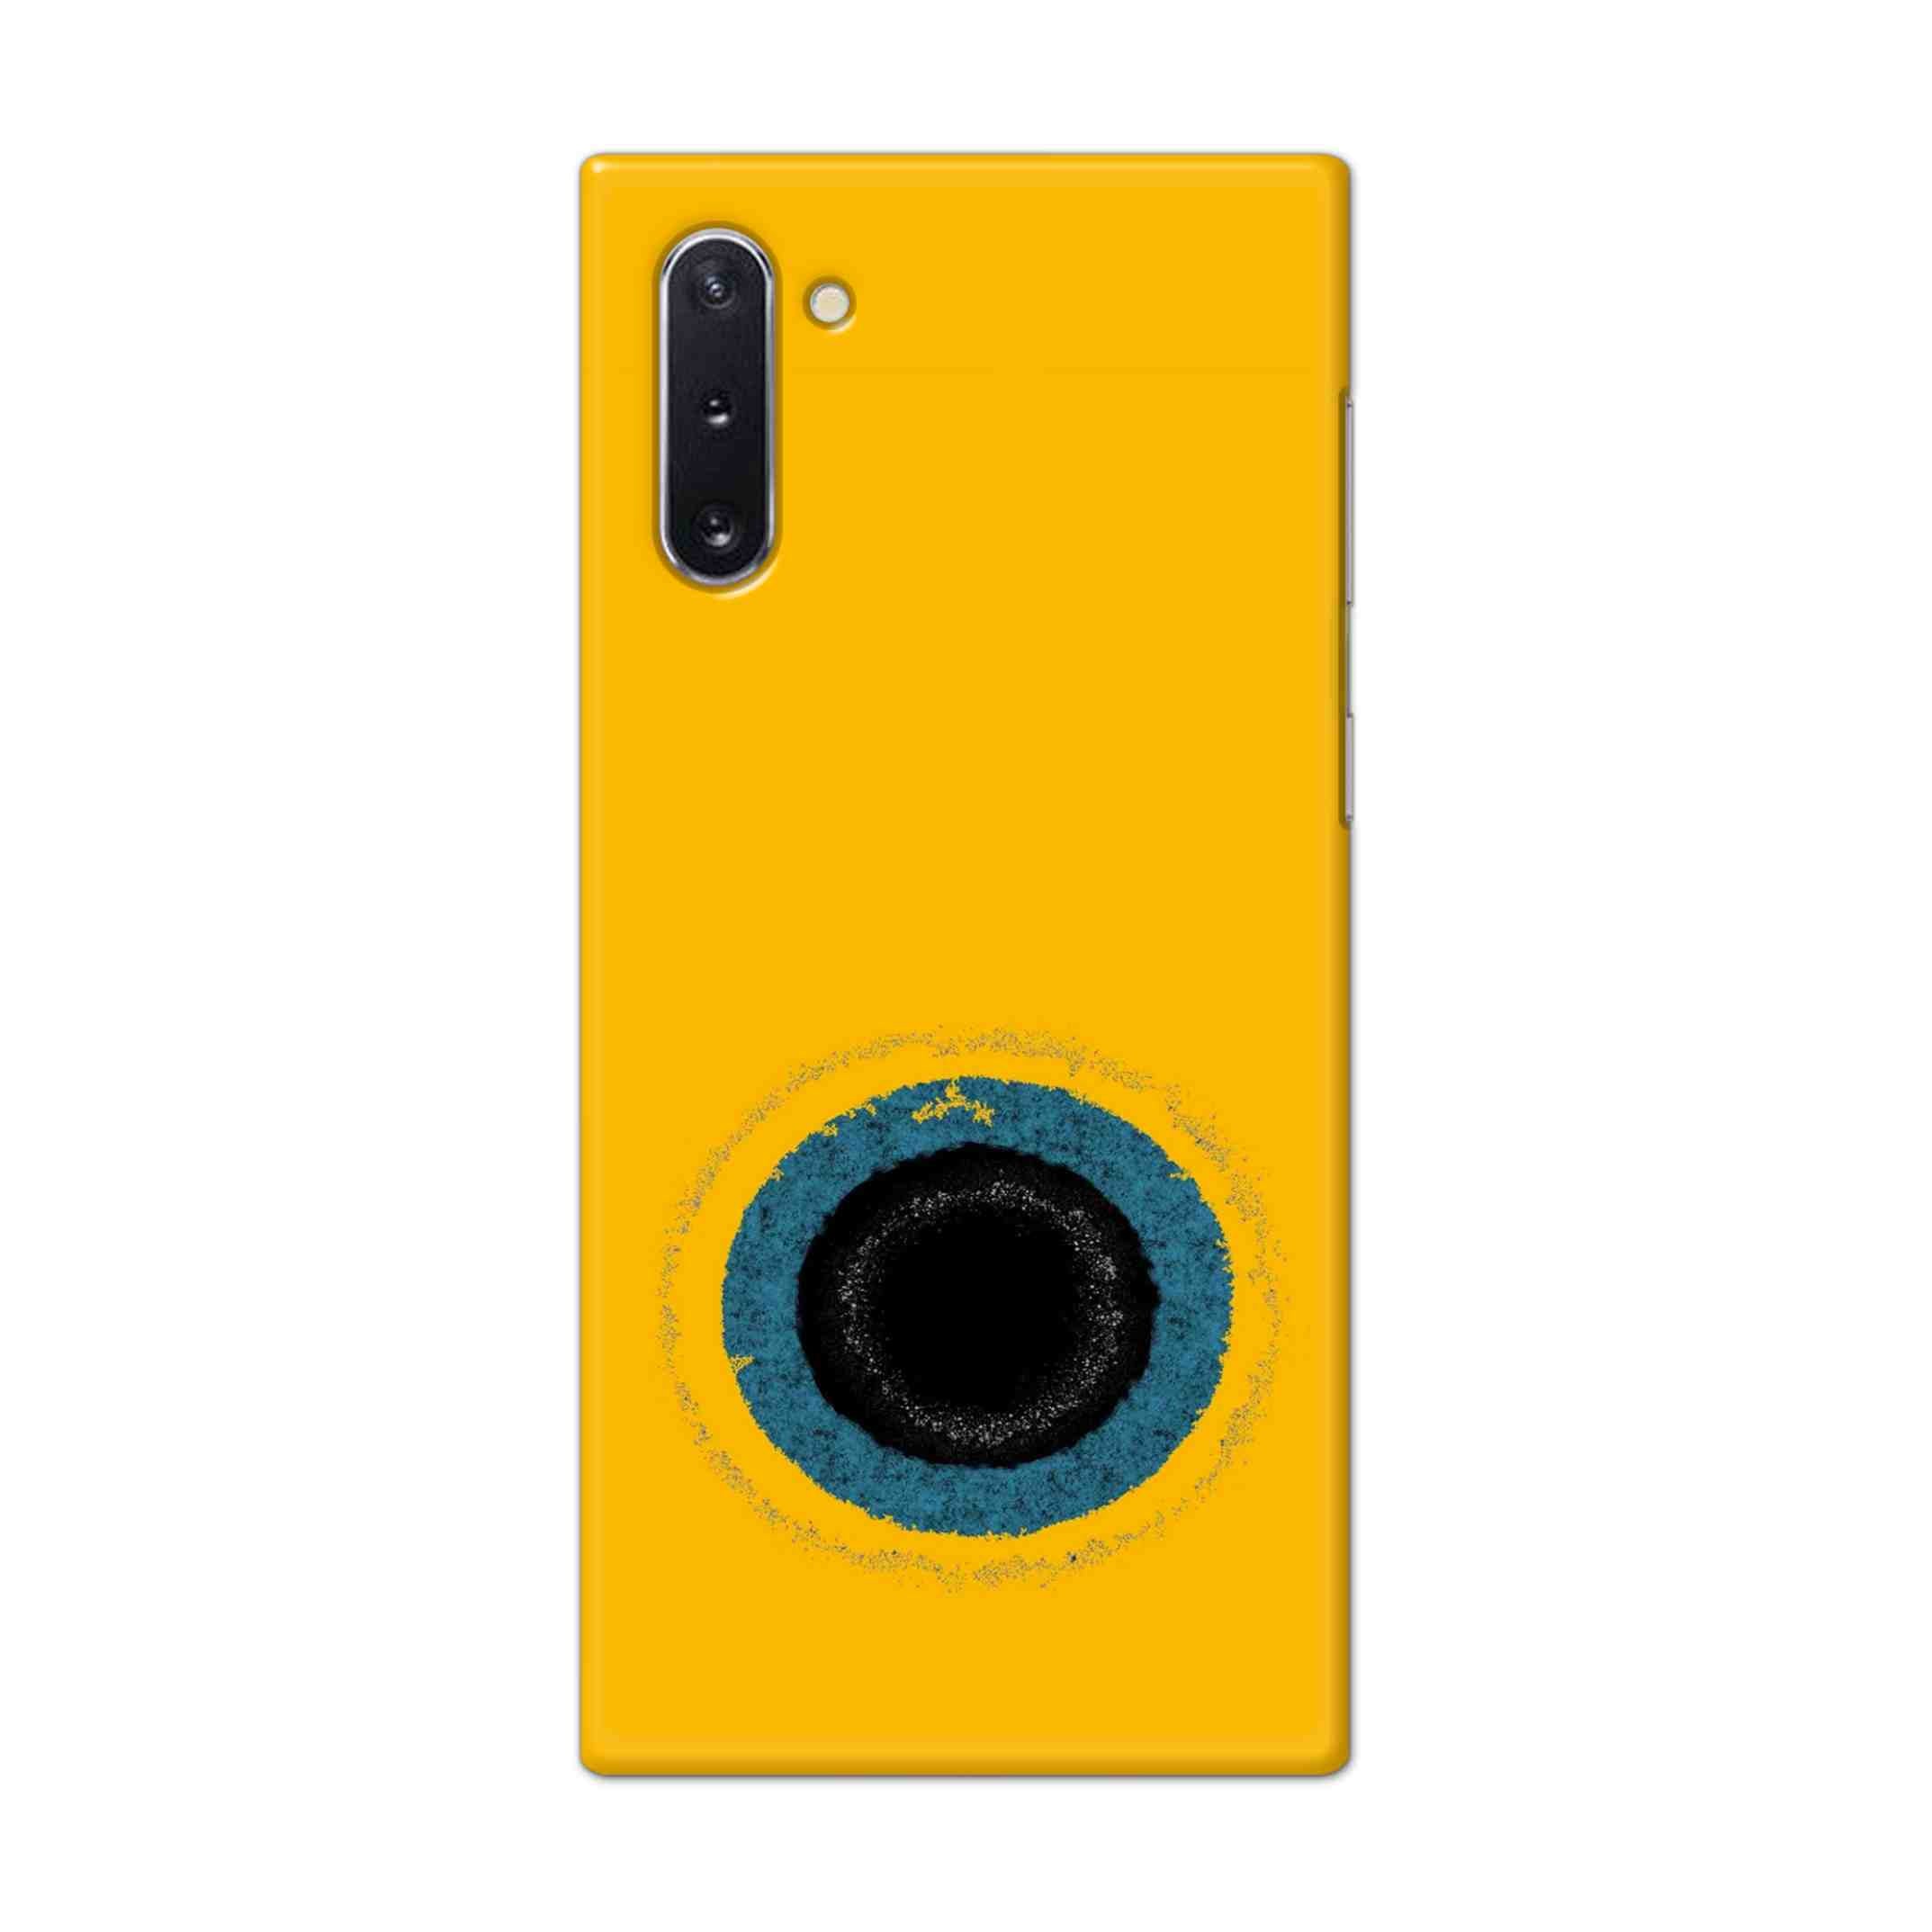 Buy Dark Hole With Yellow Background Hard Back Mobile Phone Case Cover For Samsung Galaxy Note 10 Online